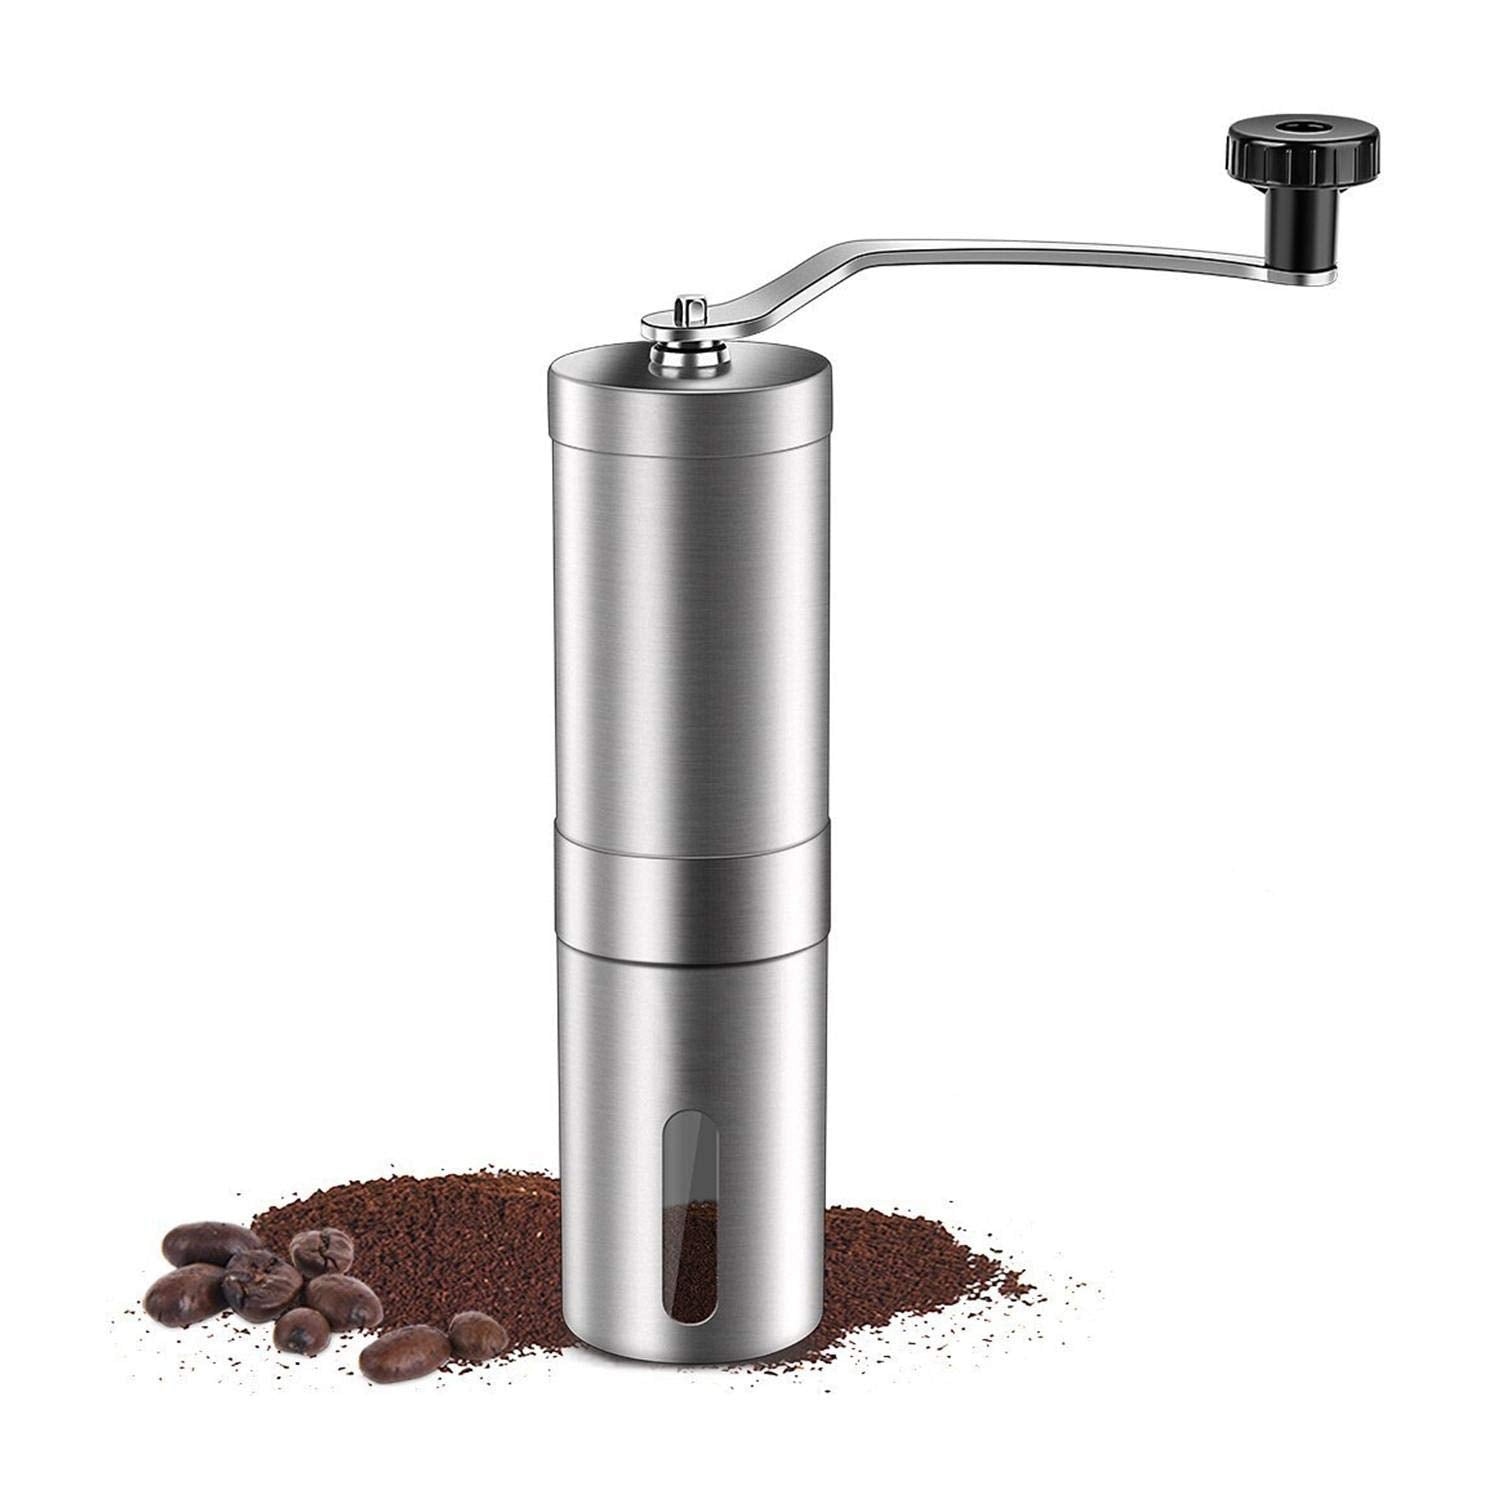 Portable Manual Coffee Grinder Conical Burr Mill Brushed Stainless Steel